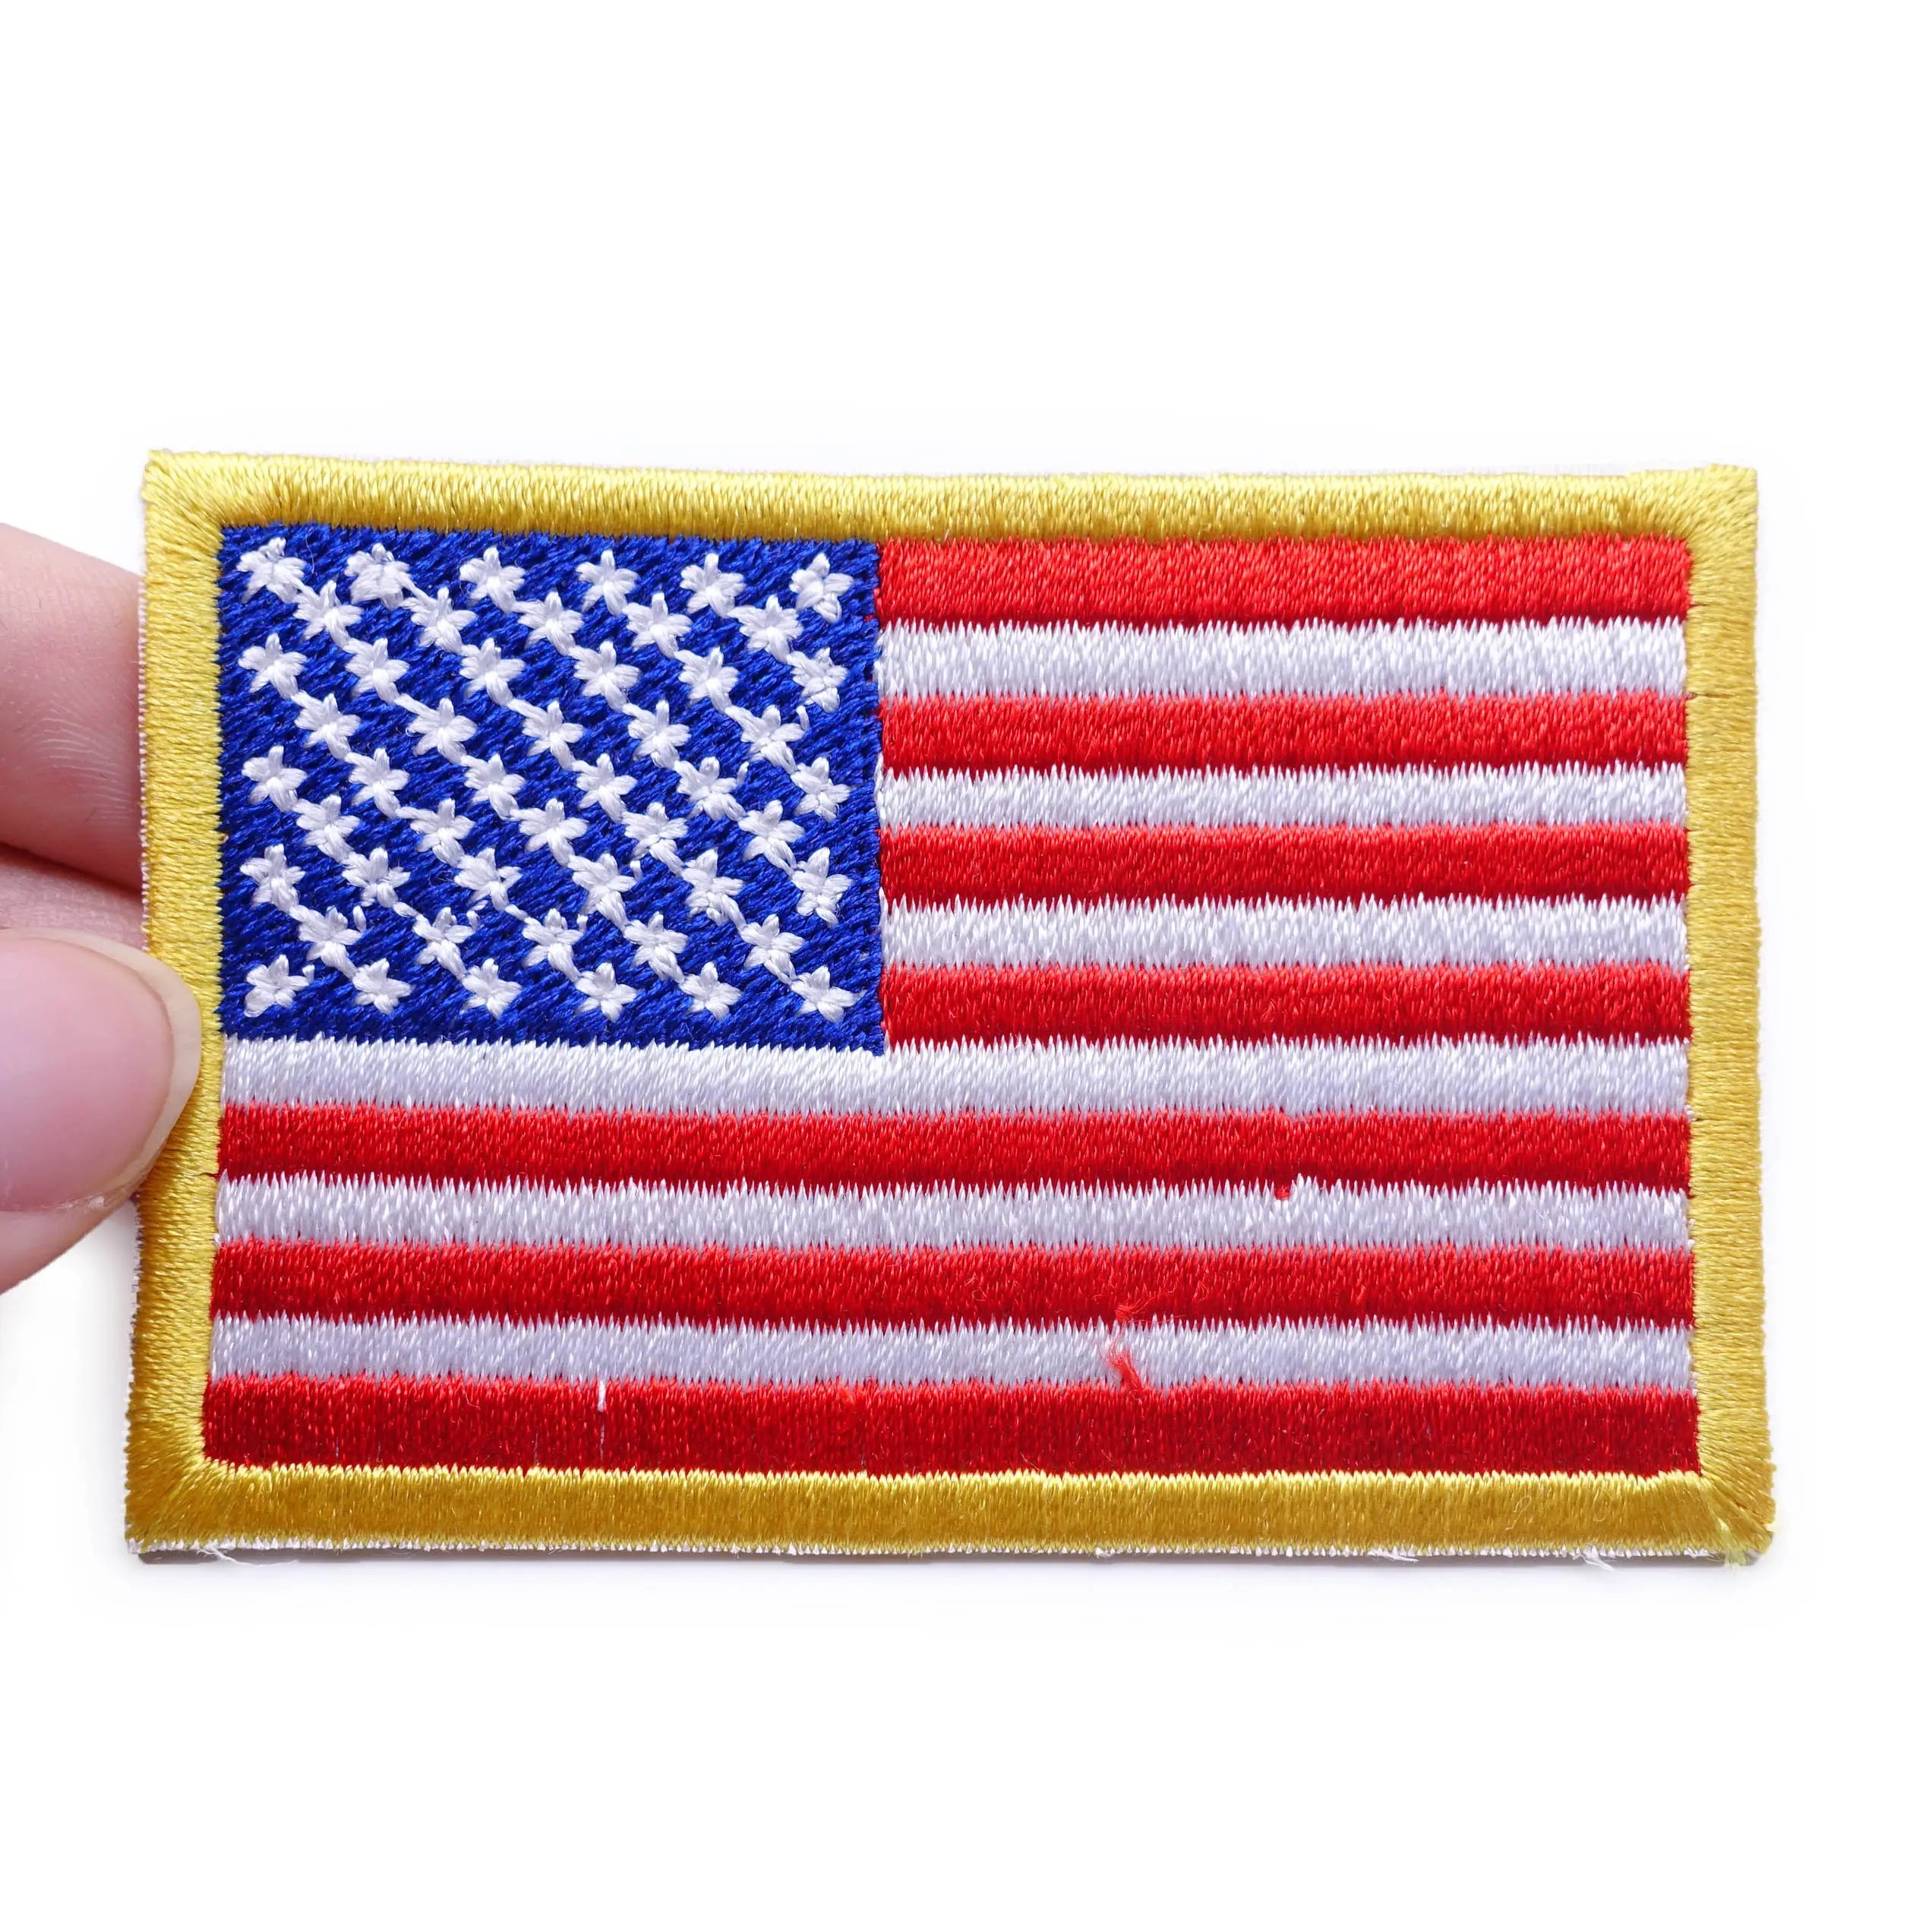 High quality custom embroidery USA american flag patches with sew on/iron on backing